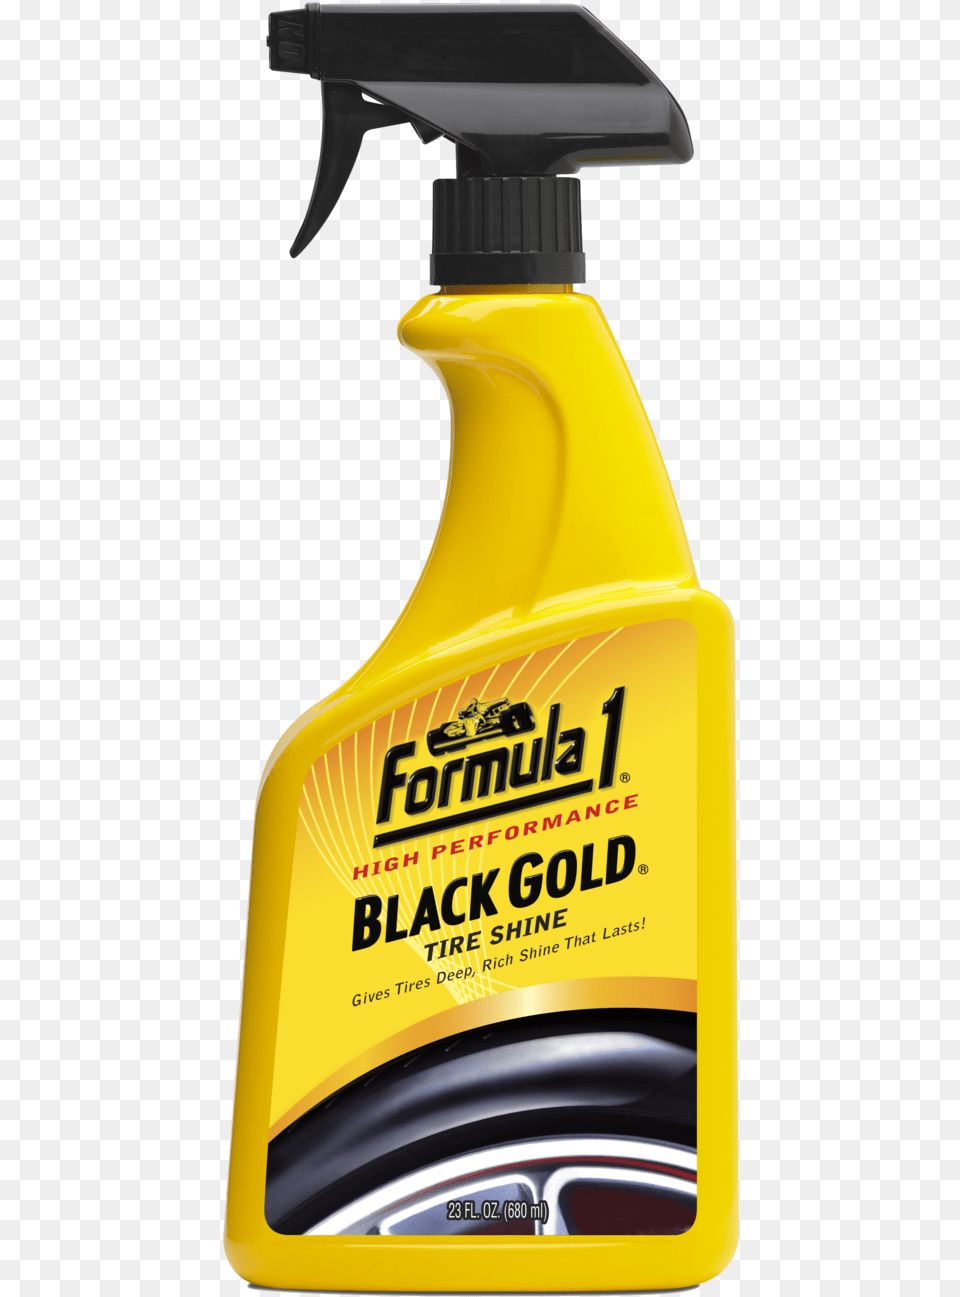 Formula 1 Black Gold Tire Shine, Bottle, Cleaning, Person, Can Png